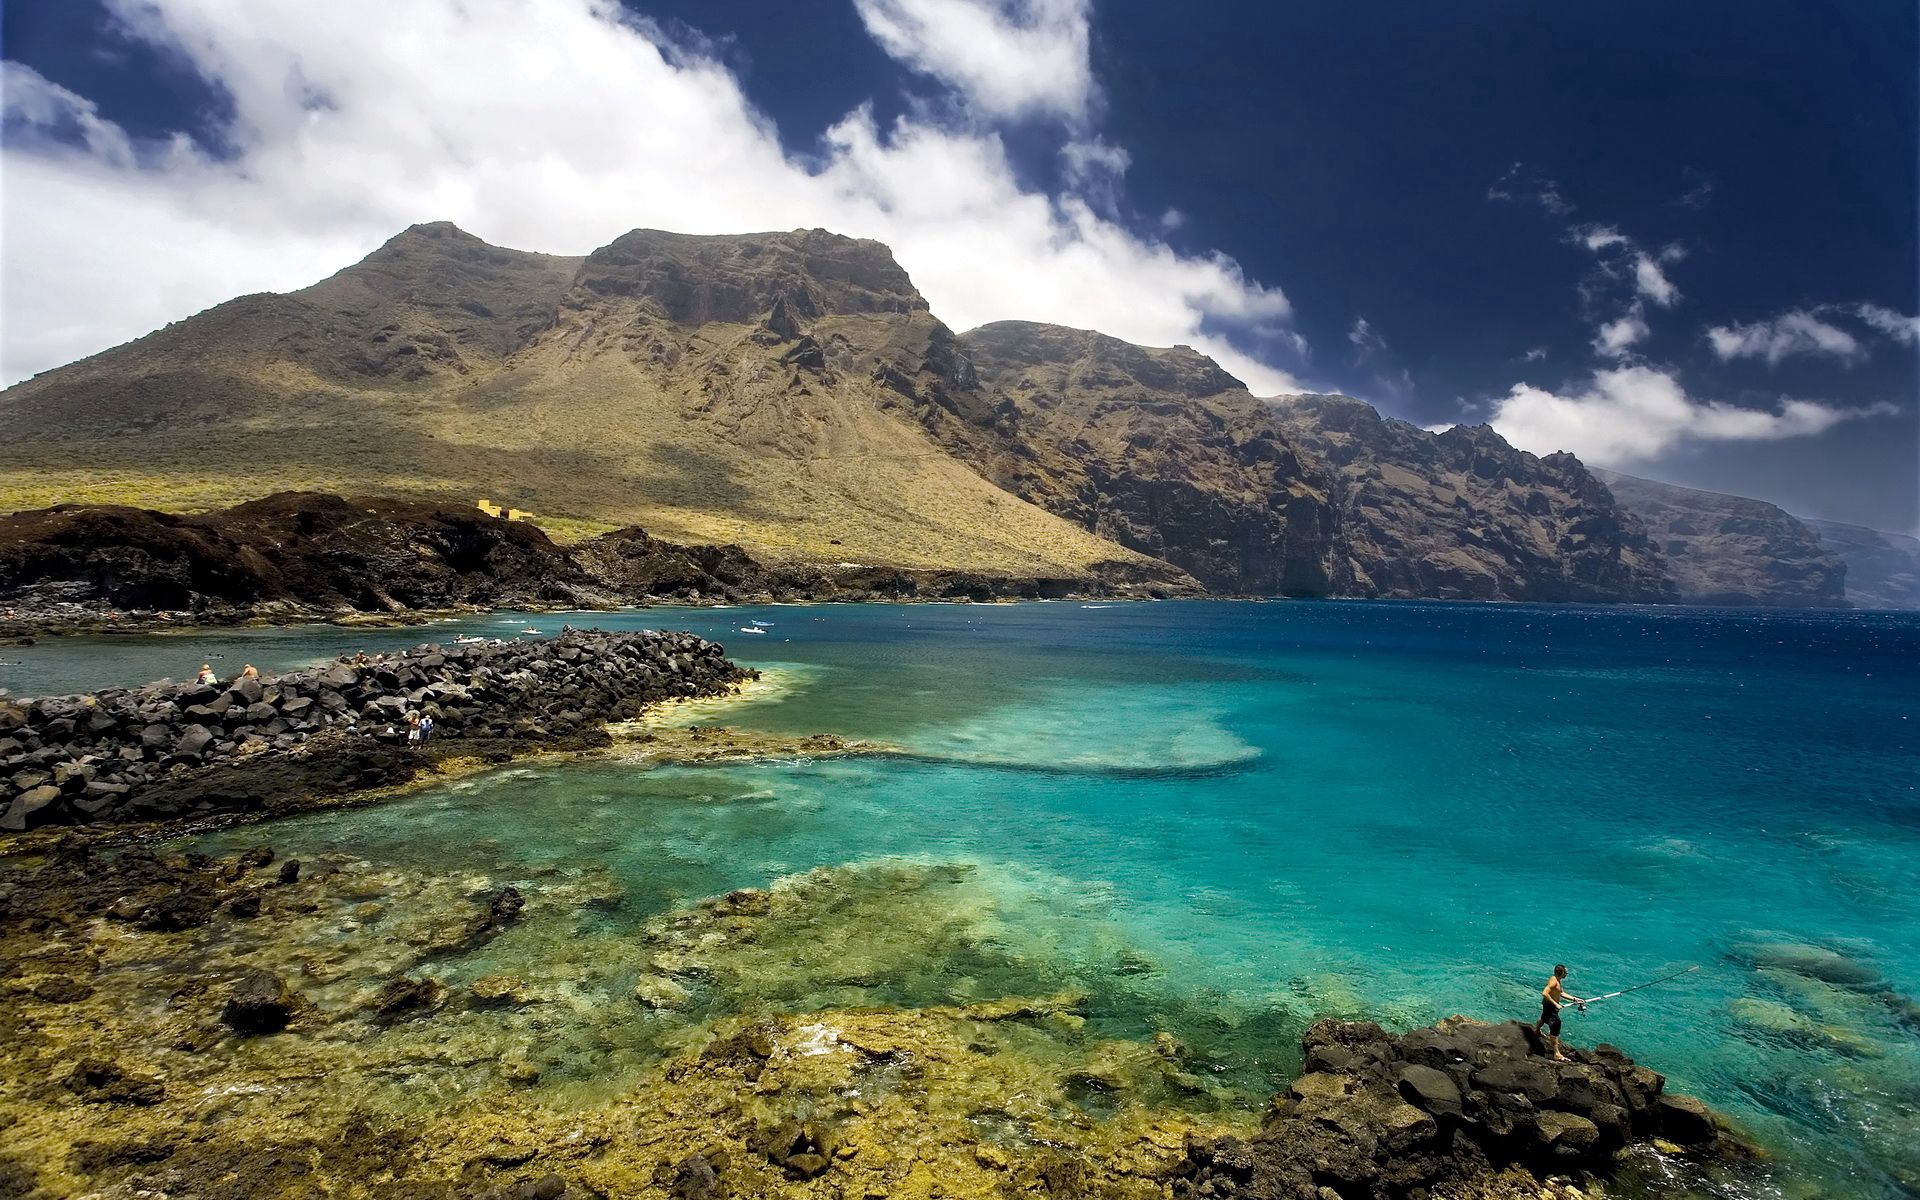 tenerife, fisherman, nature, stones, sky, mountains, clouds, bay, spain, clear, i see